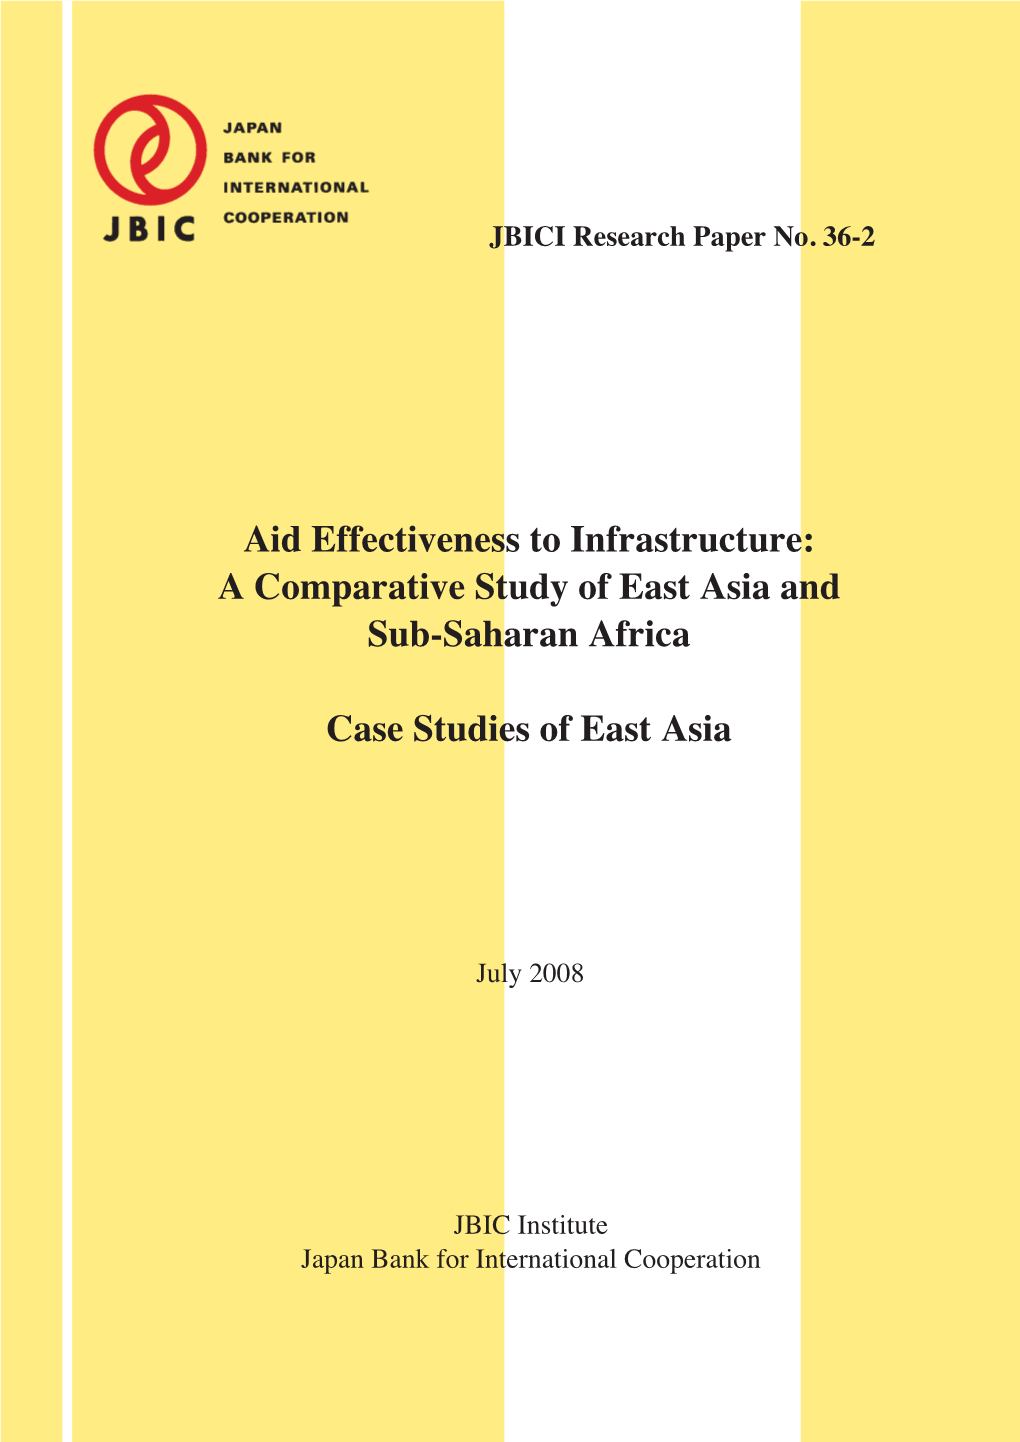 Aid Effectiveness to Infrastructure: a Comparative Study of East Asia and Sub-Saharan Africa, Case Studies